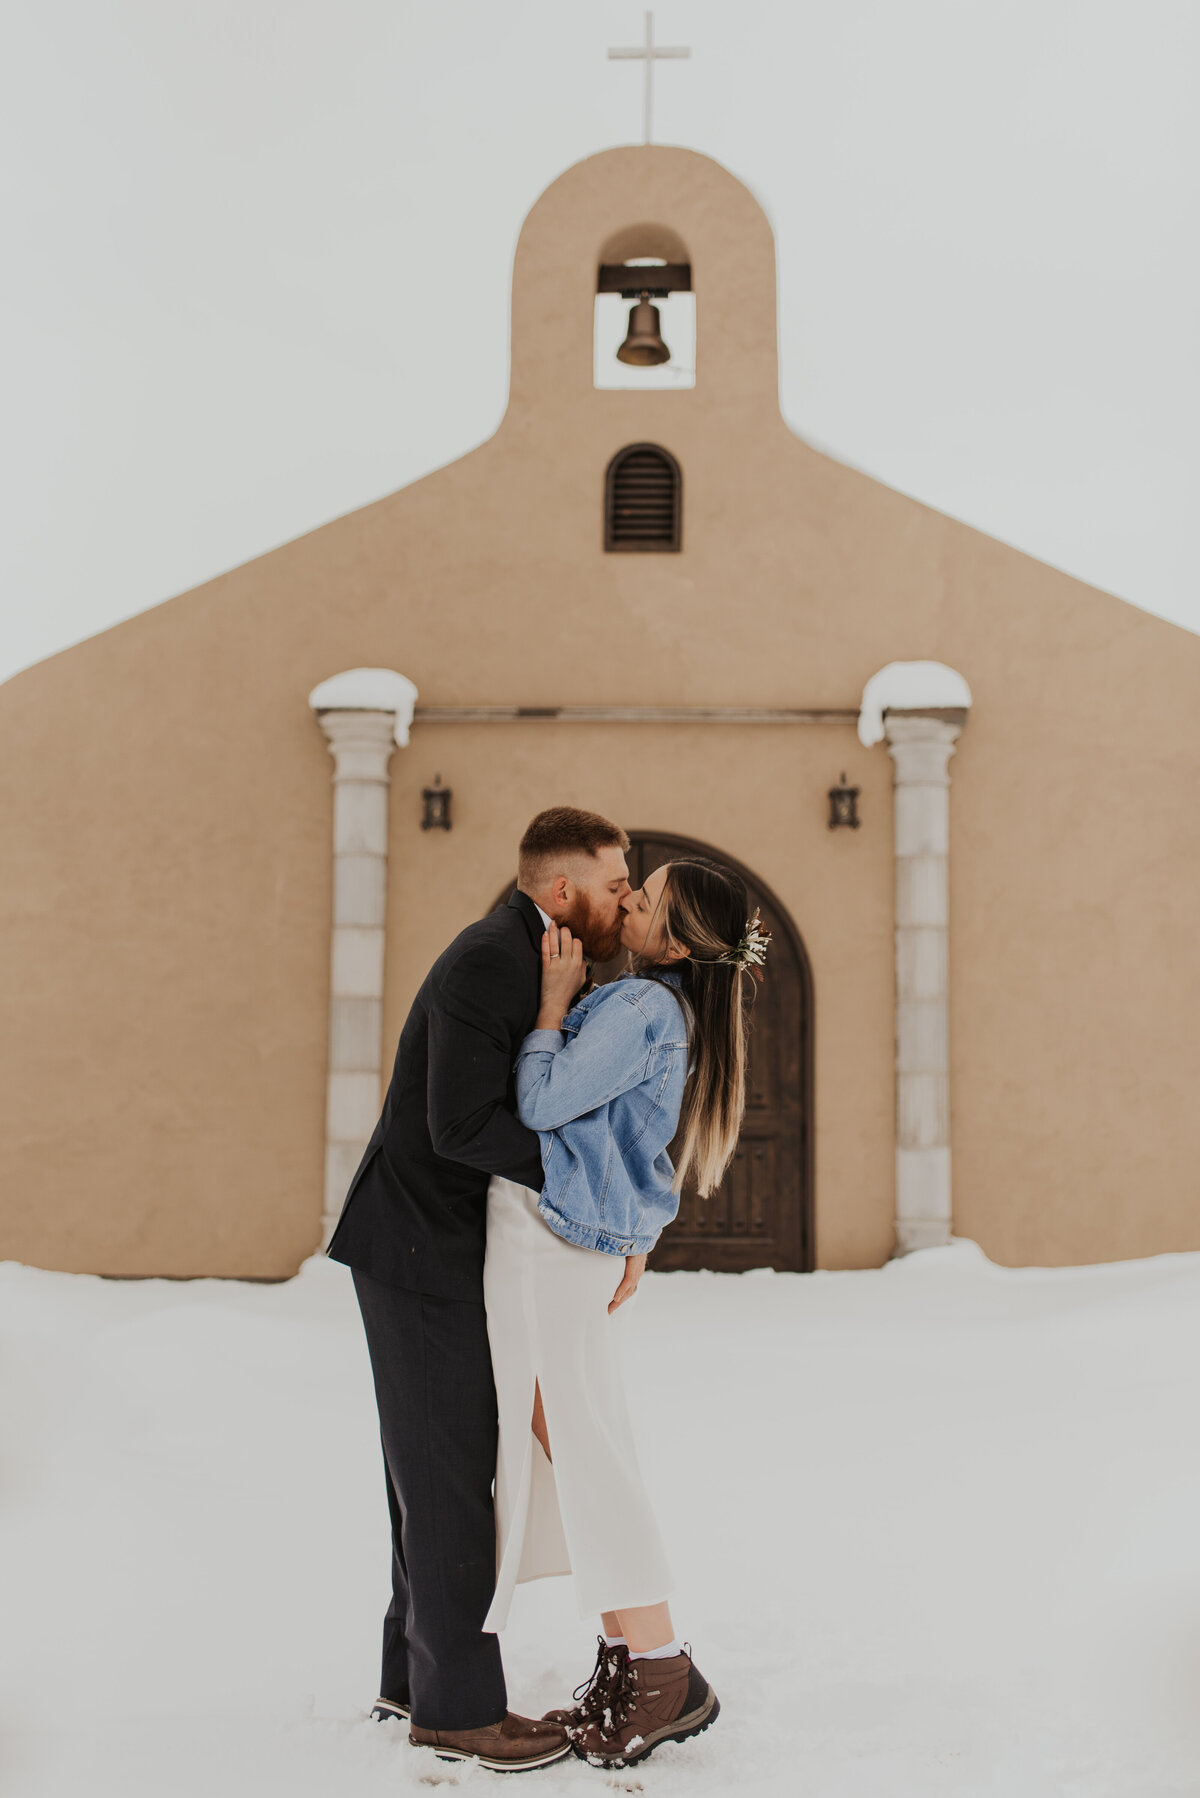 Kyle-and-abby-elopement-big-bend-by-bruna-kitchen-photography-4